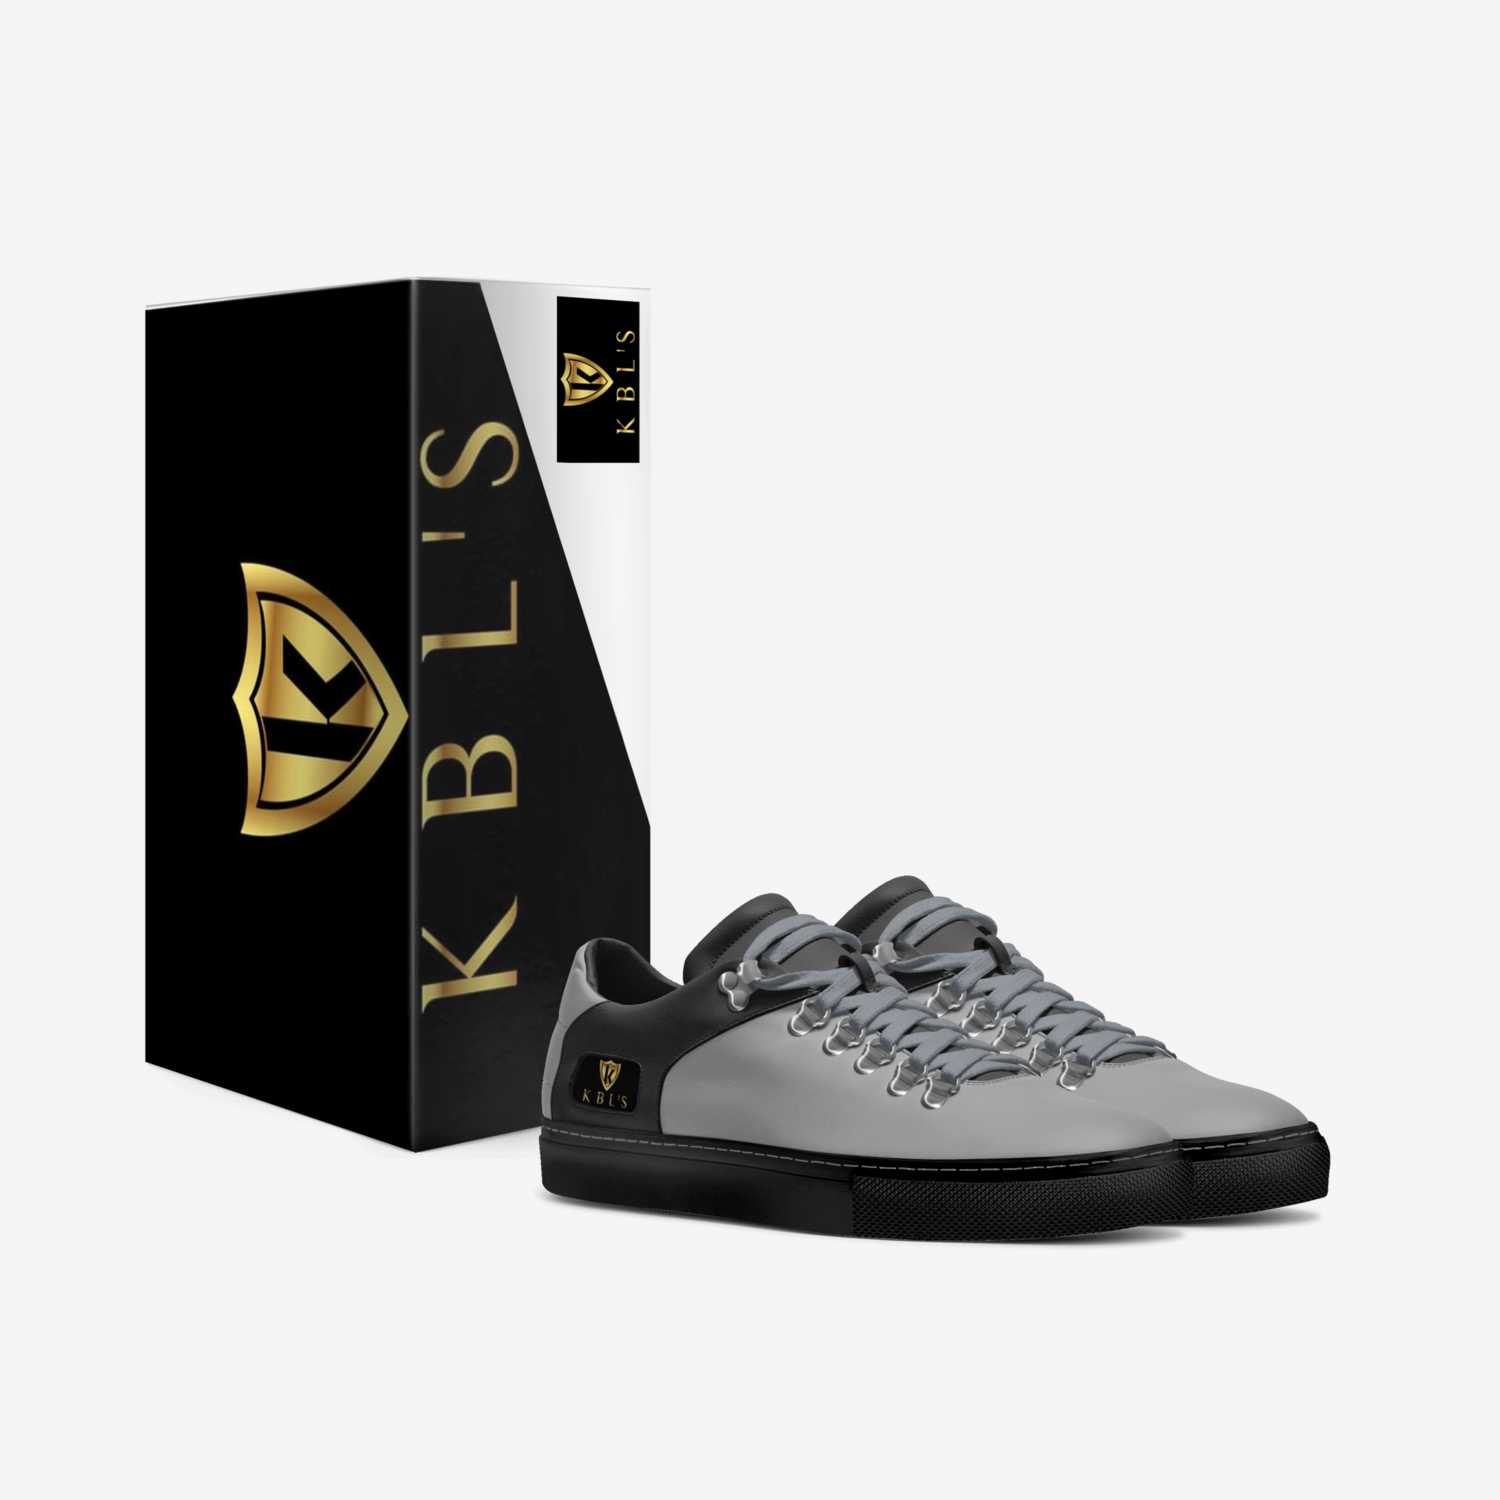 KBL'S  custom made in Italy shoes by Keith Boykin | Box view